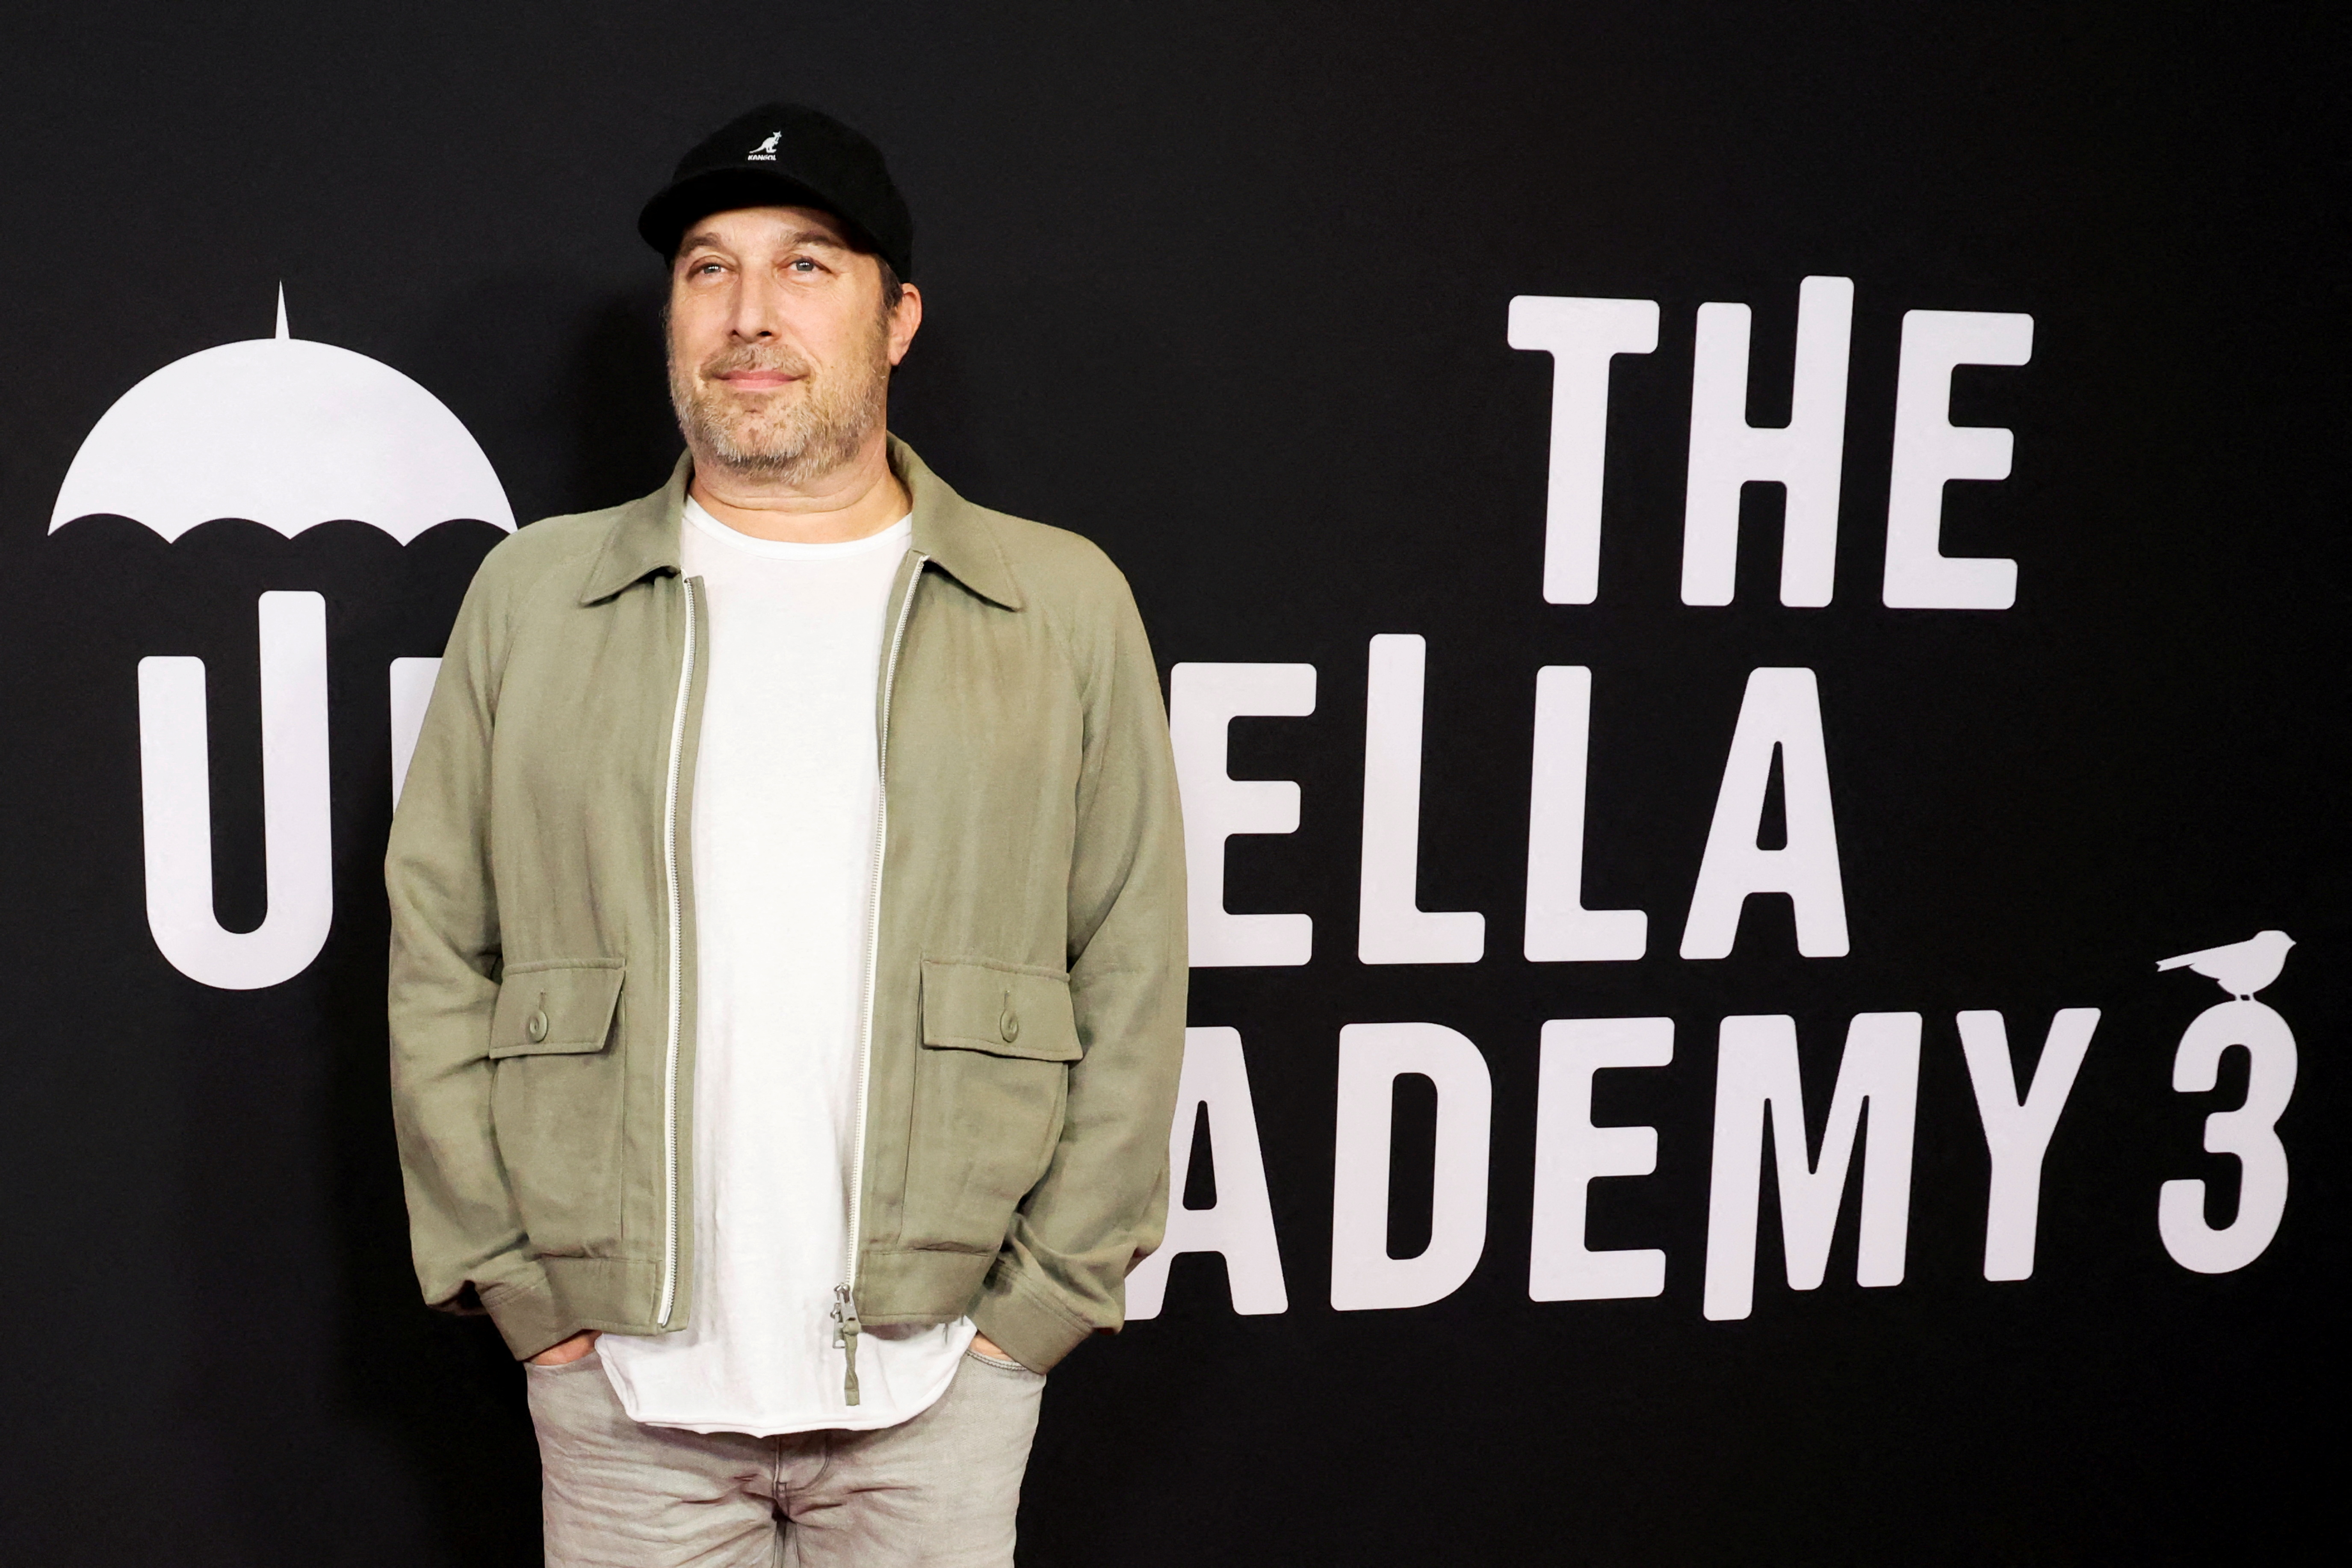 A premiere for the television series The Umbrella Academy